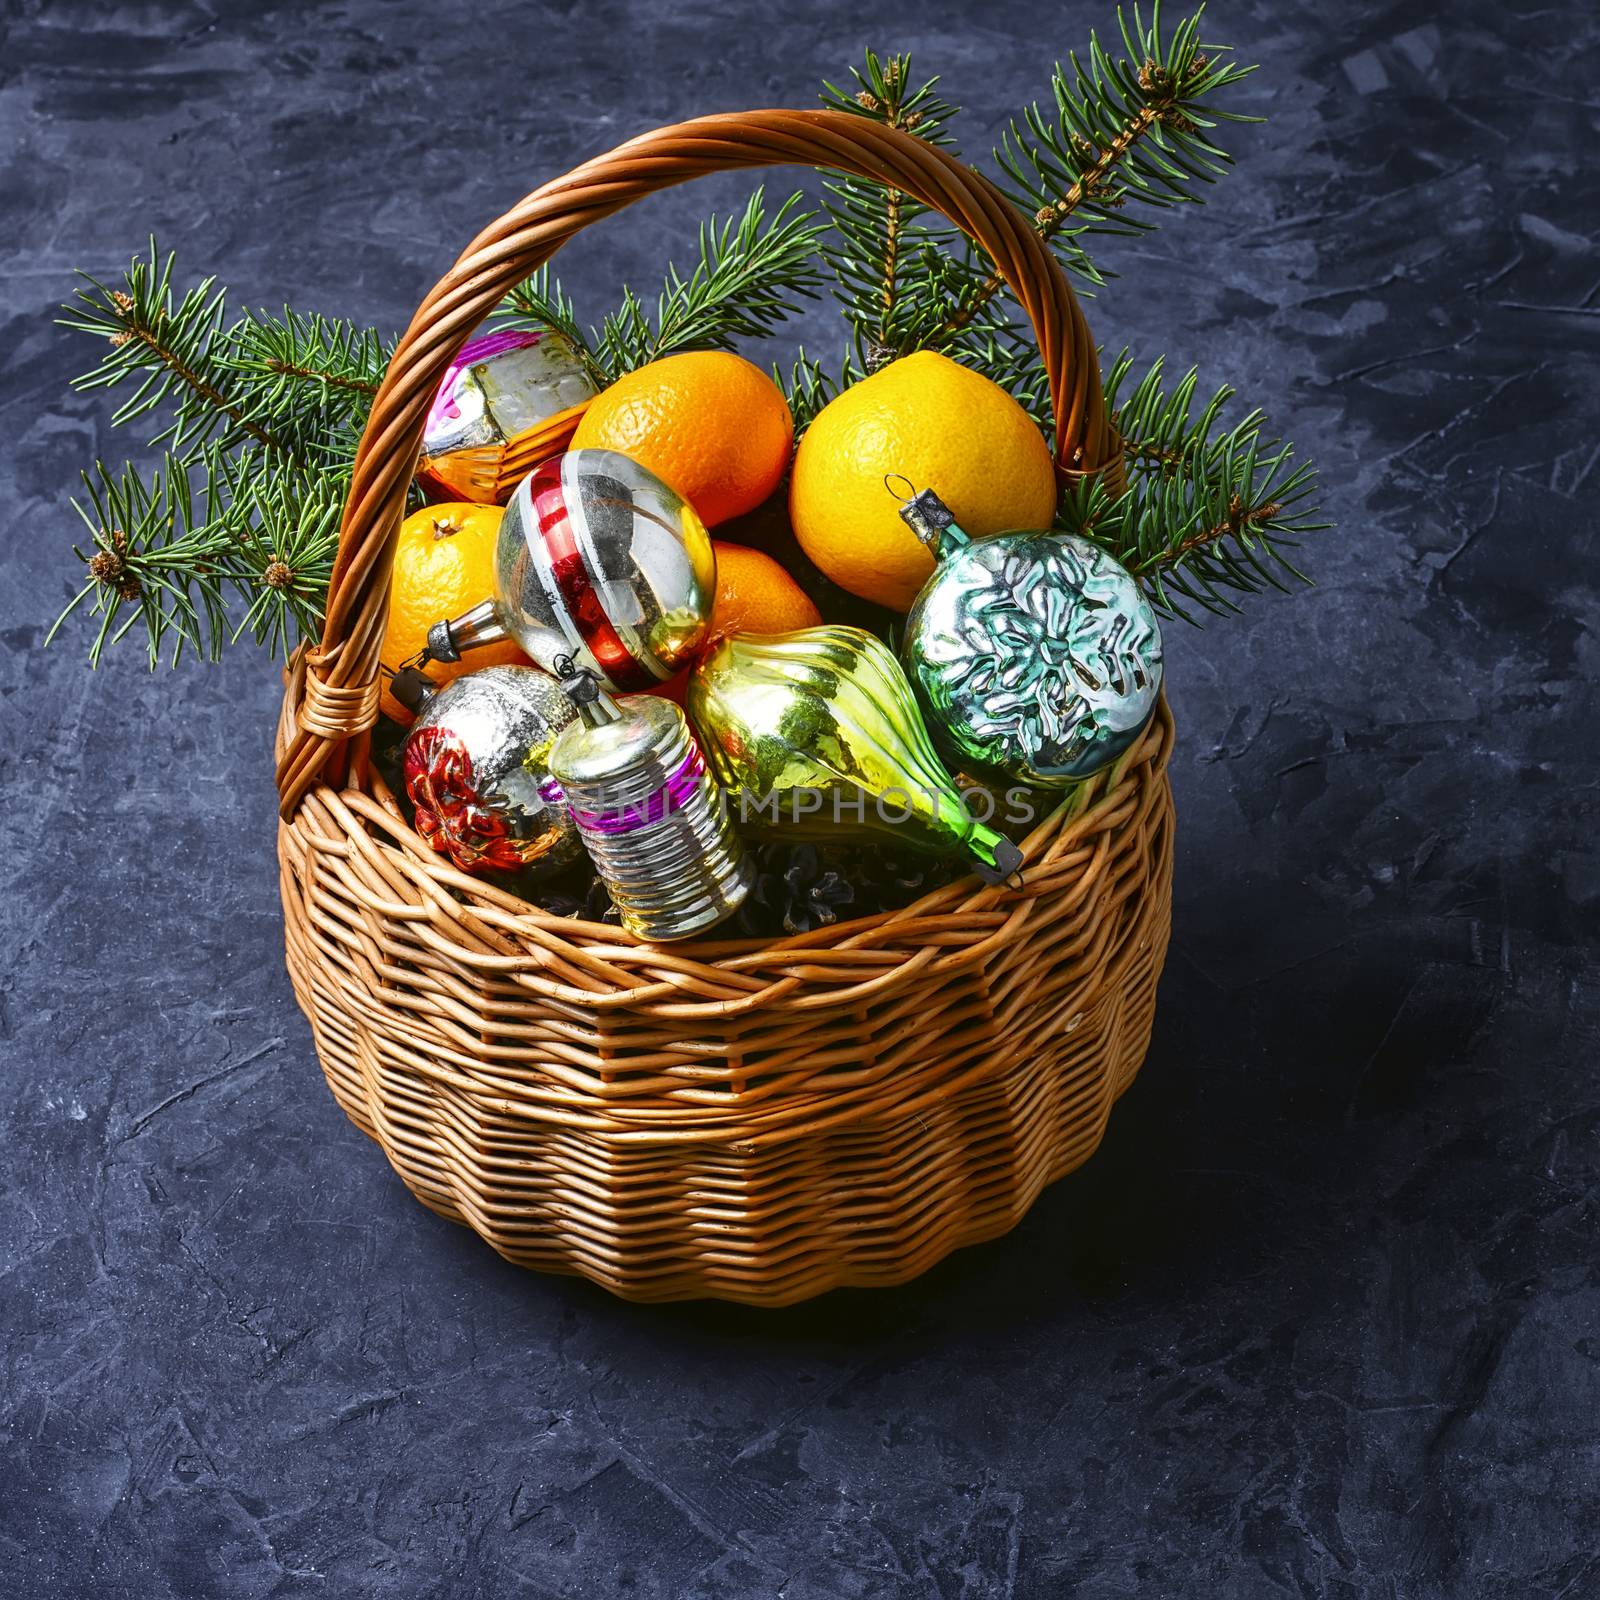 Wicker basket with vintage Christmas toys and gifts